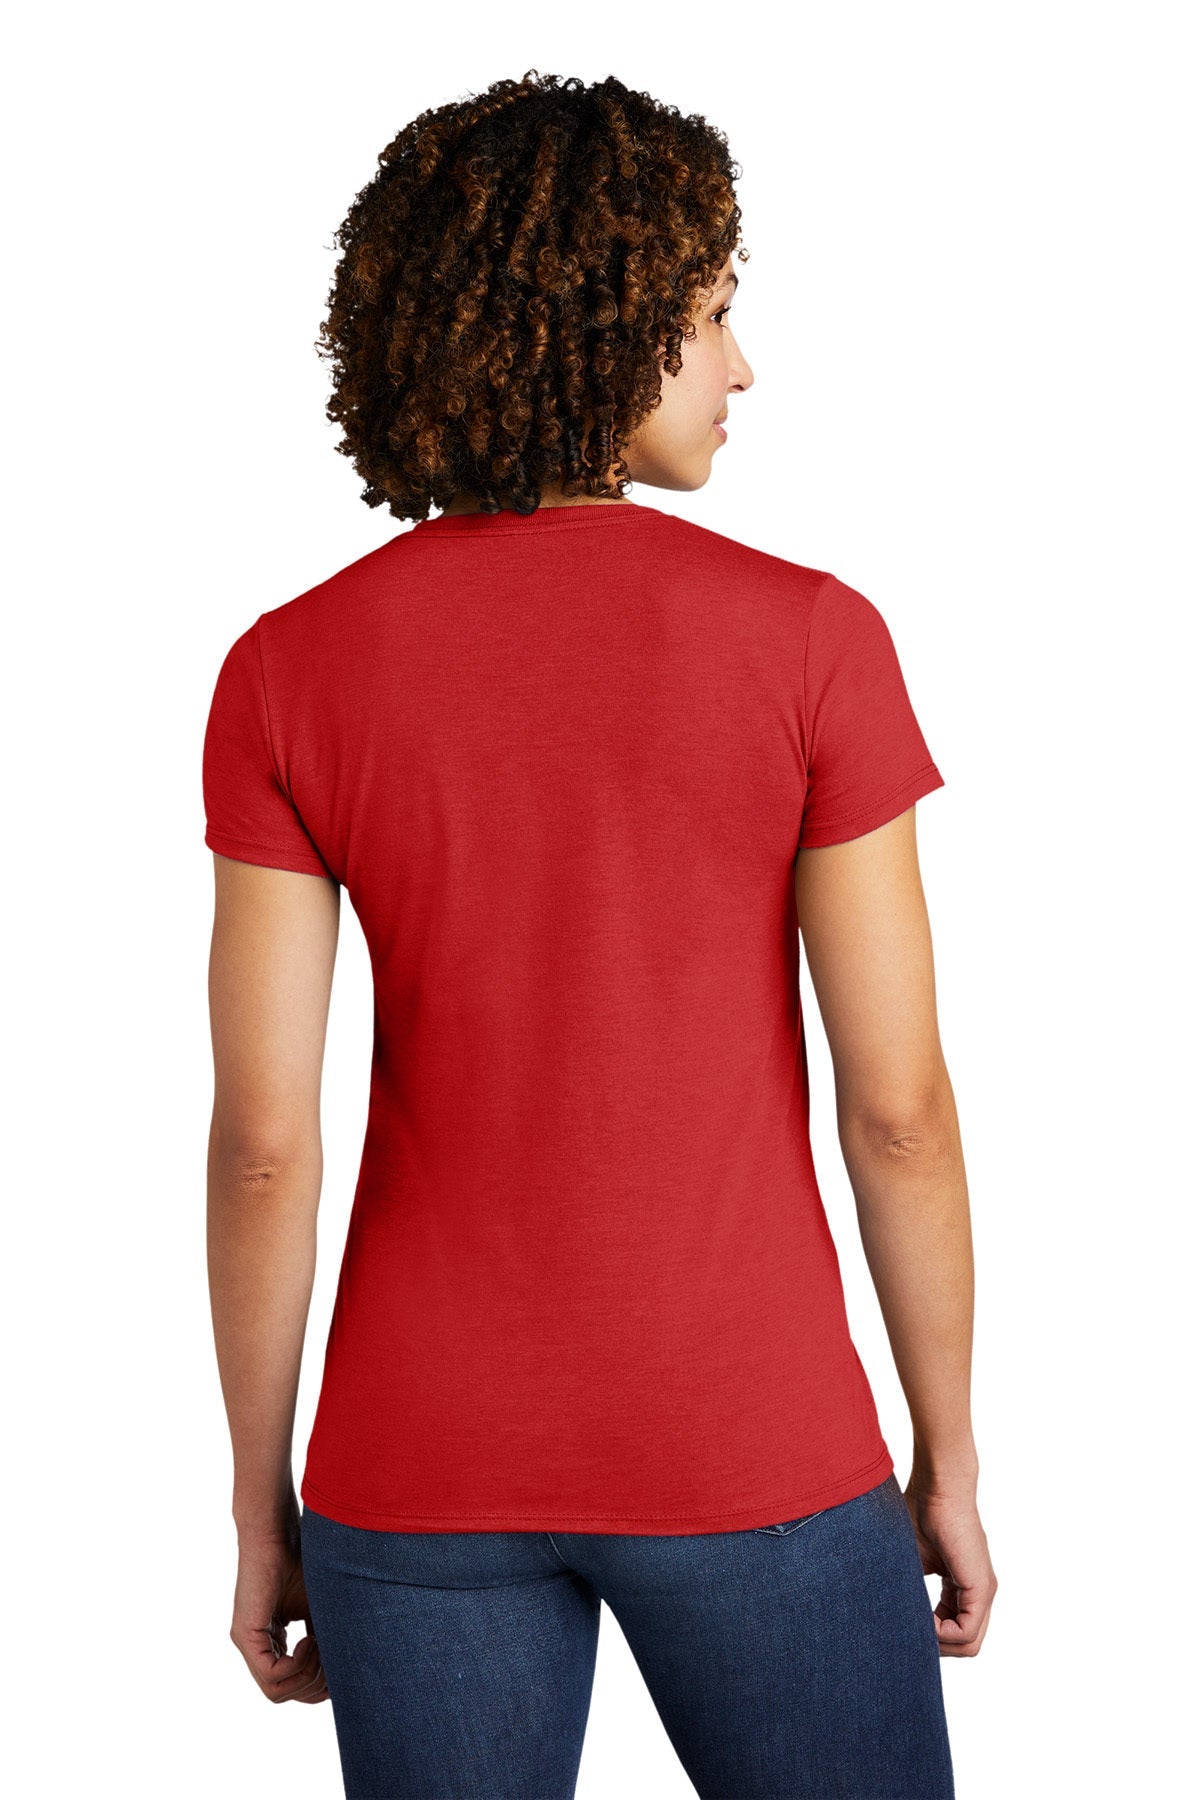 Allmade Women's Tri-Blend Customized Tee, Rise Up Red